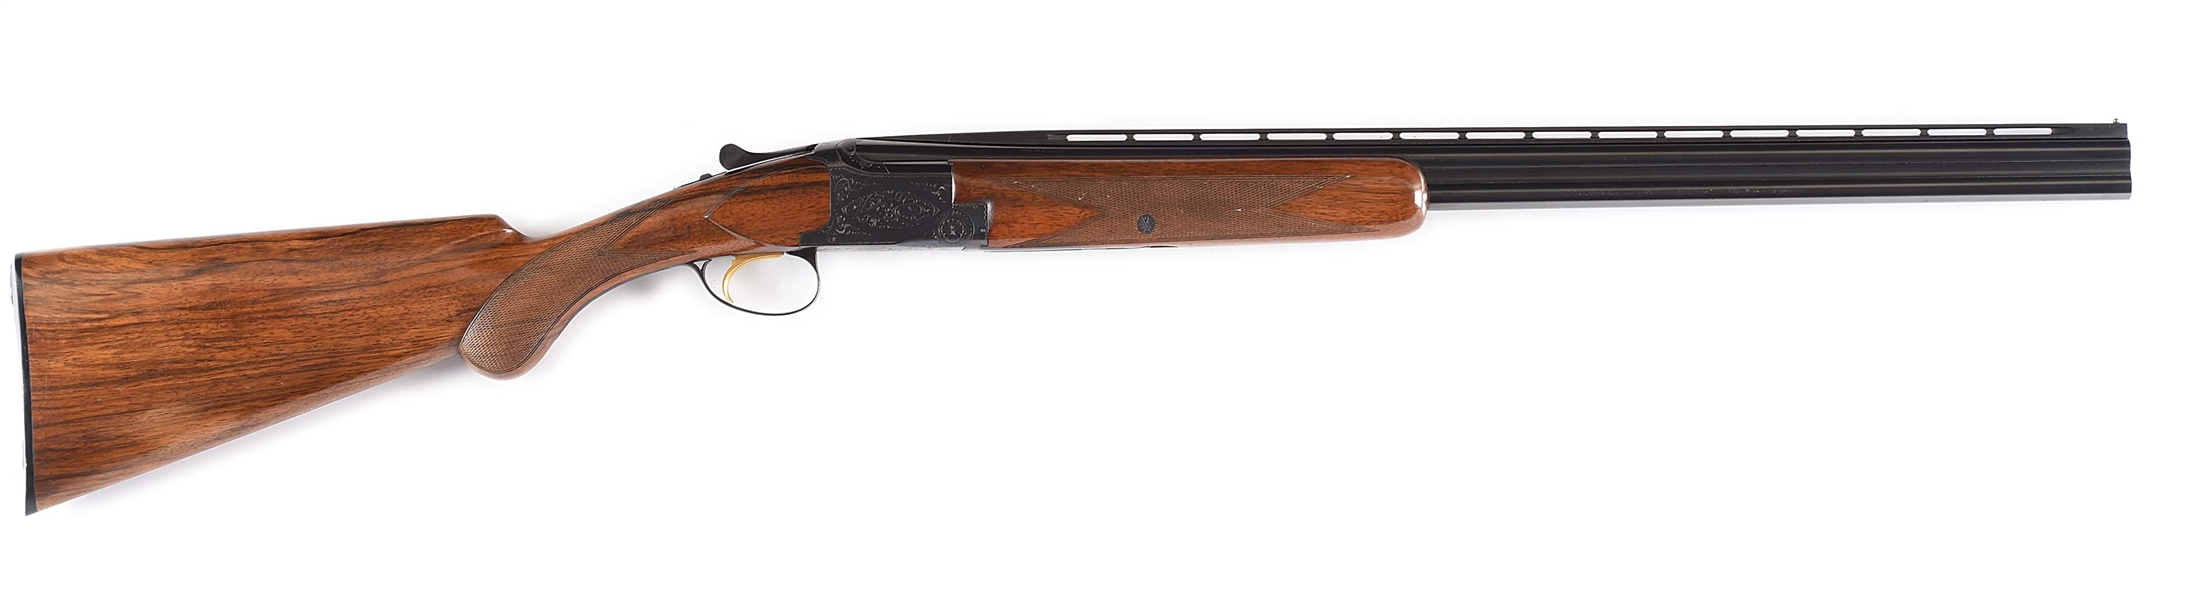 (C) RARE EARLY 60S LONG TANG ROUND KNOB 28 GAUGE BROWNING SUPERPOSED SHOTGUN WITH ORIGINAL EXTRA BARRELS AND CASE.